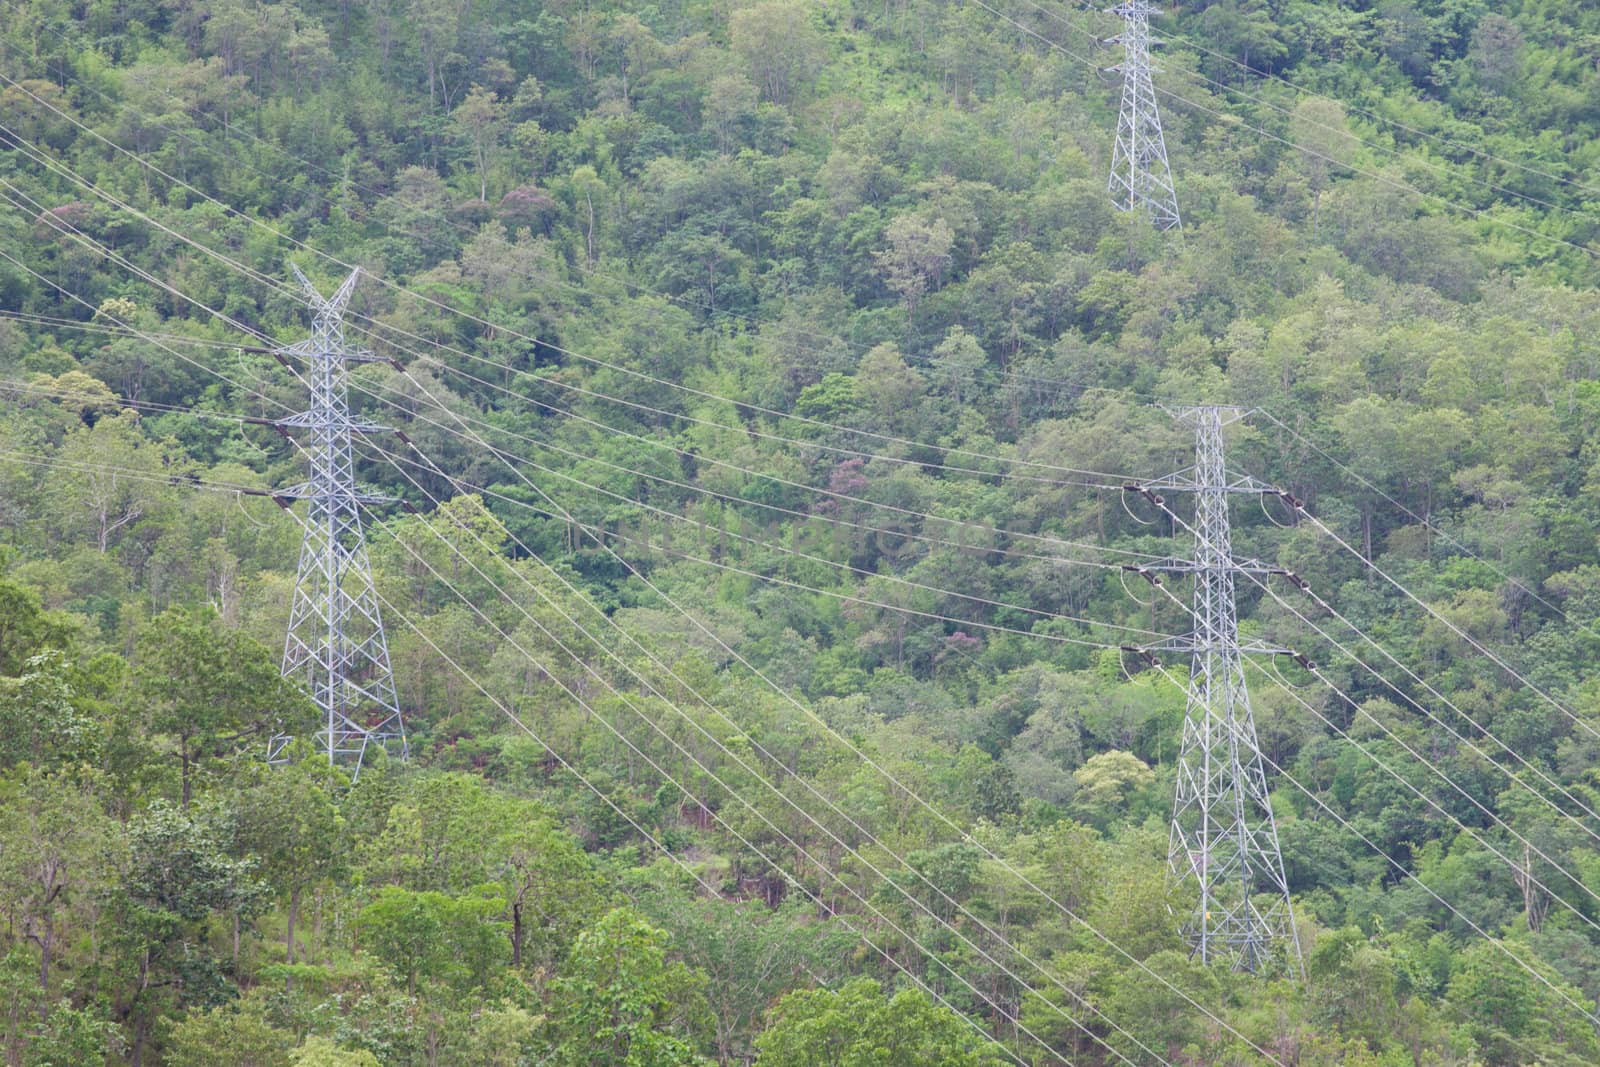 Power line in mountains